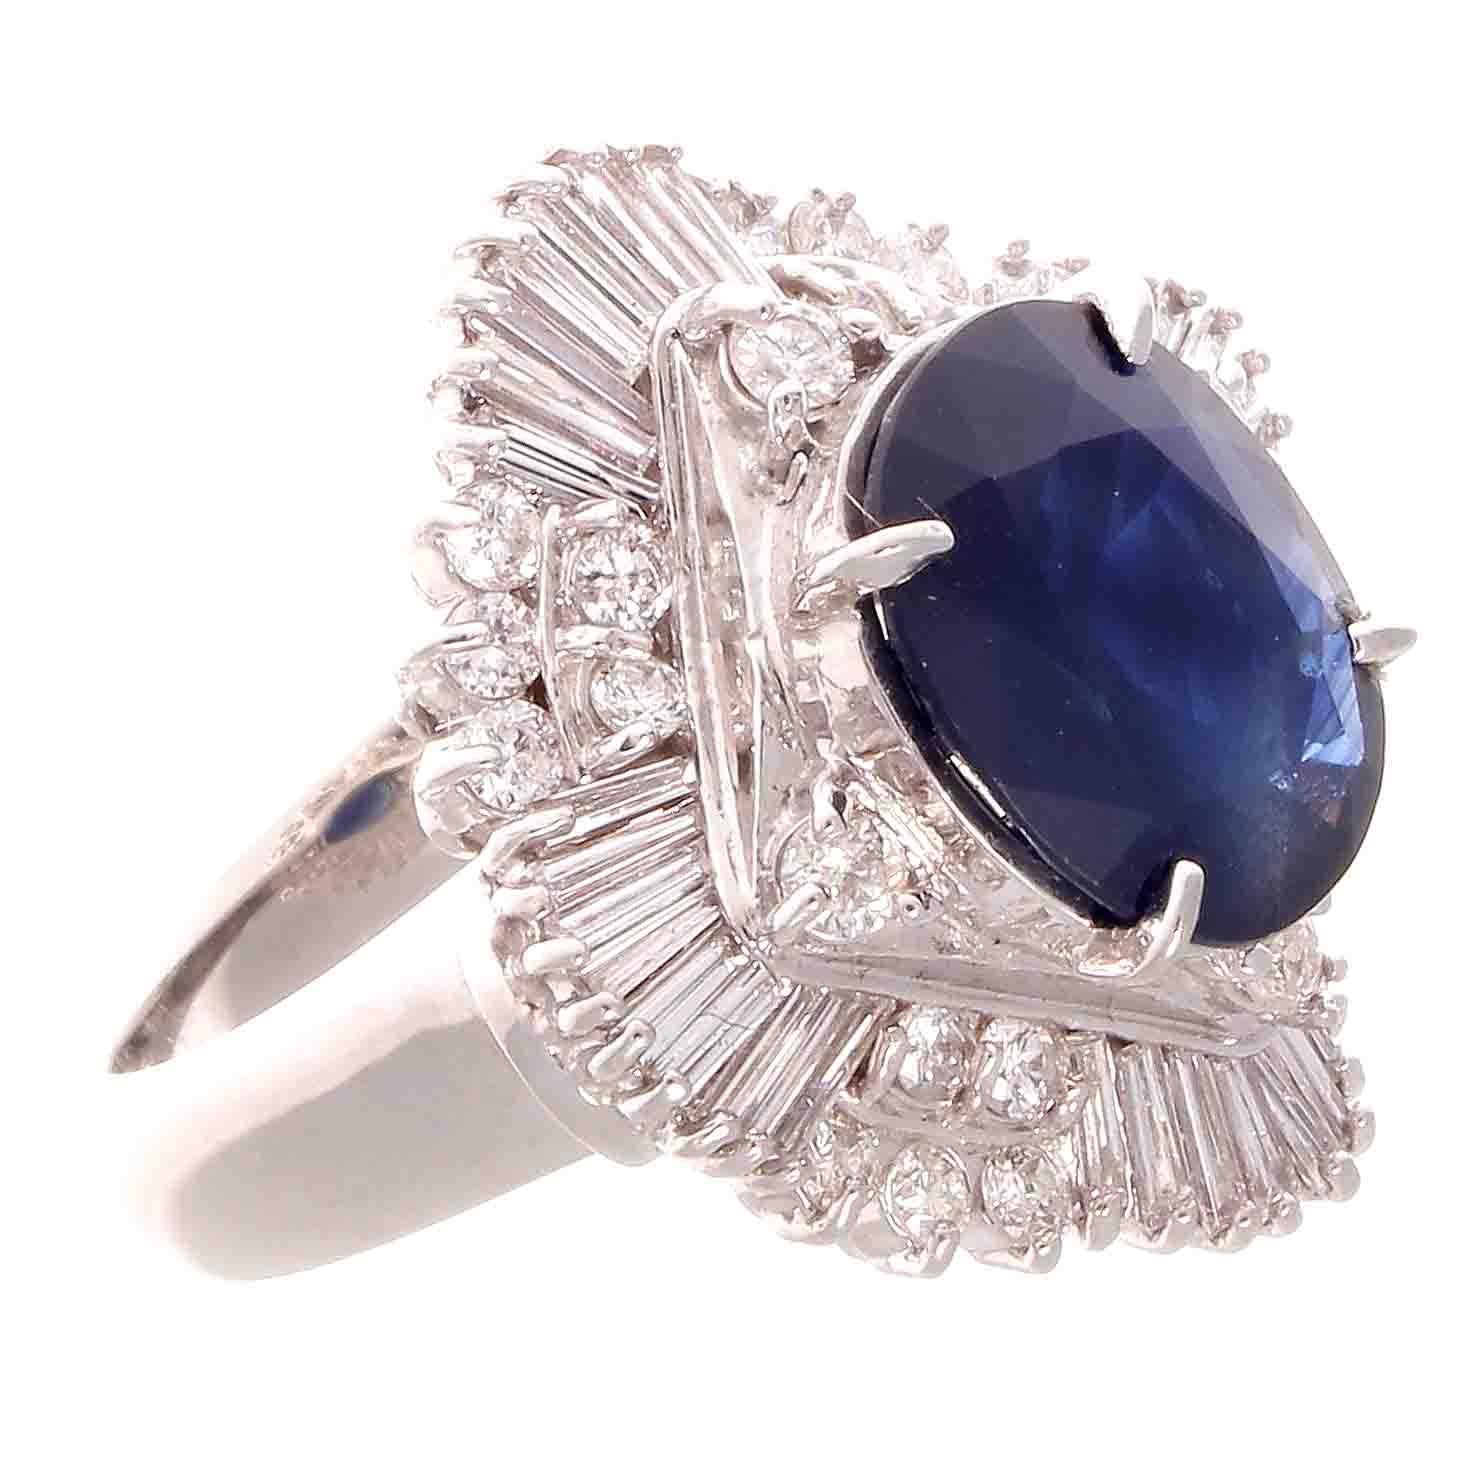 A superb sapphire diamond ring that sparkles and is full of life. Featuring a 4.45 carat navy blue sapphire accented by a spray of 1.81 carats of baguette and round cut colorless diamonds. Crafted in platinum.

Ring size 6 and can easily be resized,